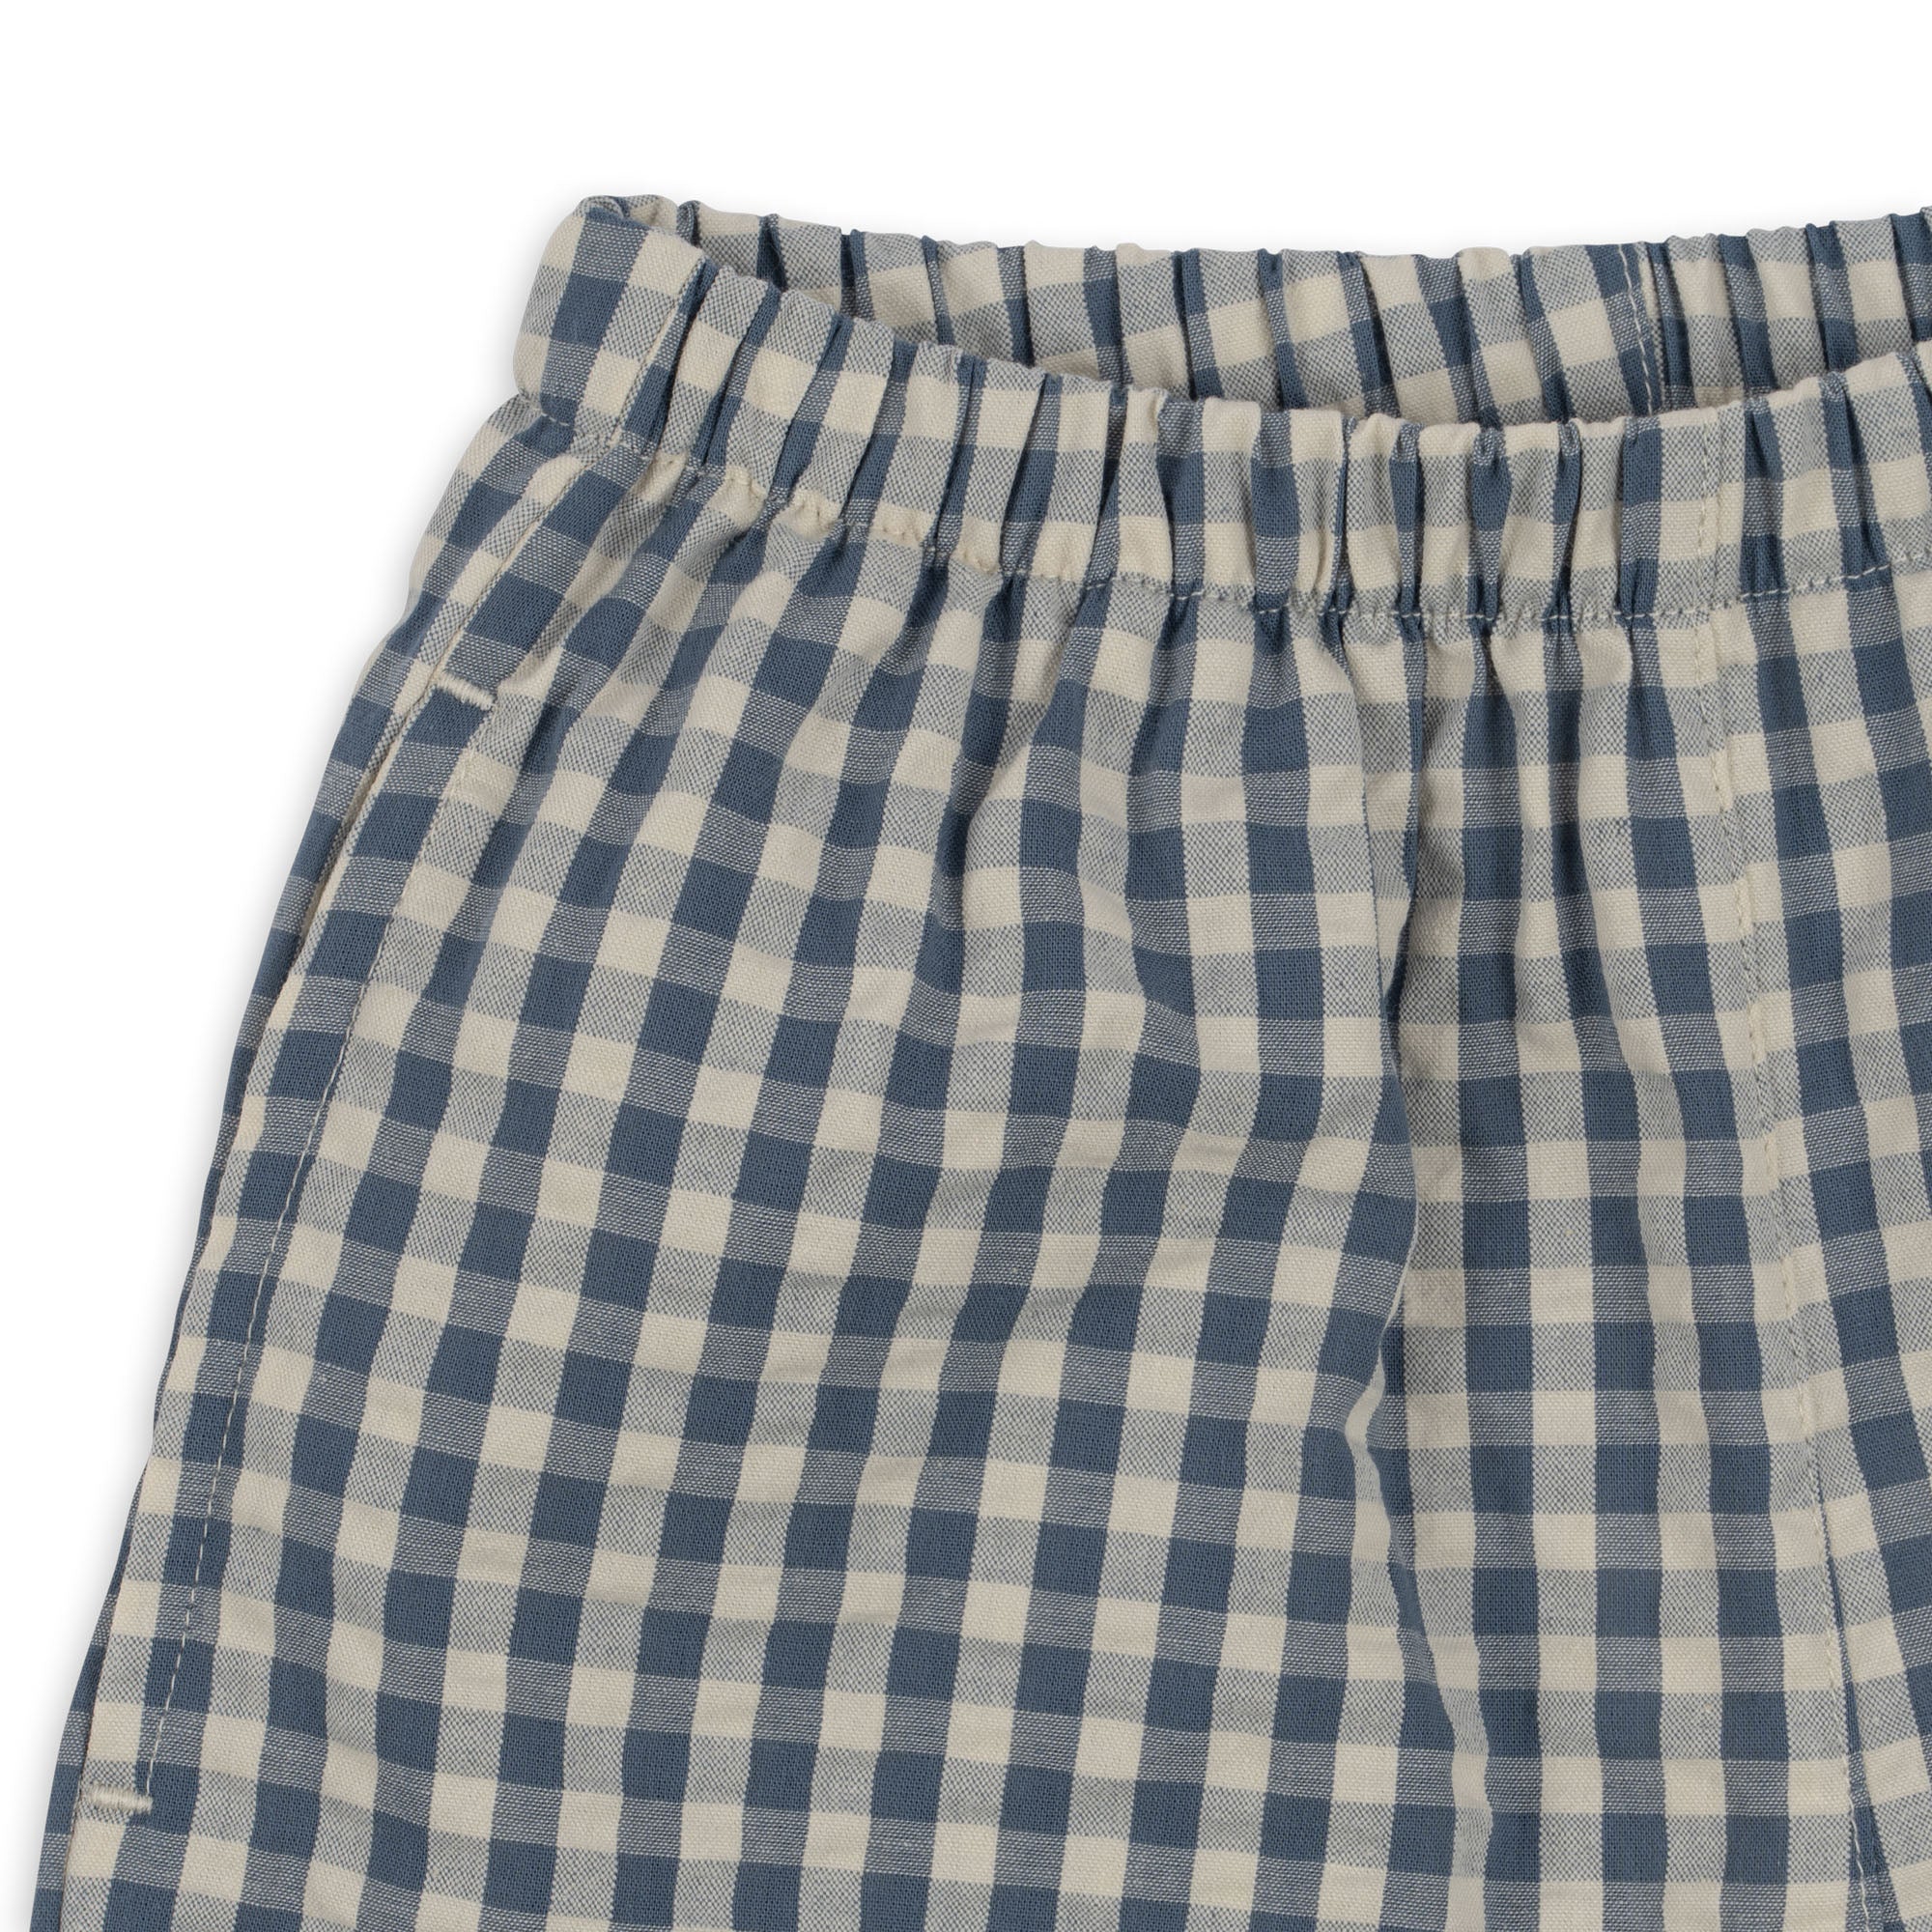 Konges Sløjd A/S Woven Shorts & Bloomers captains blue check